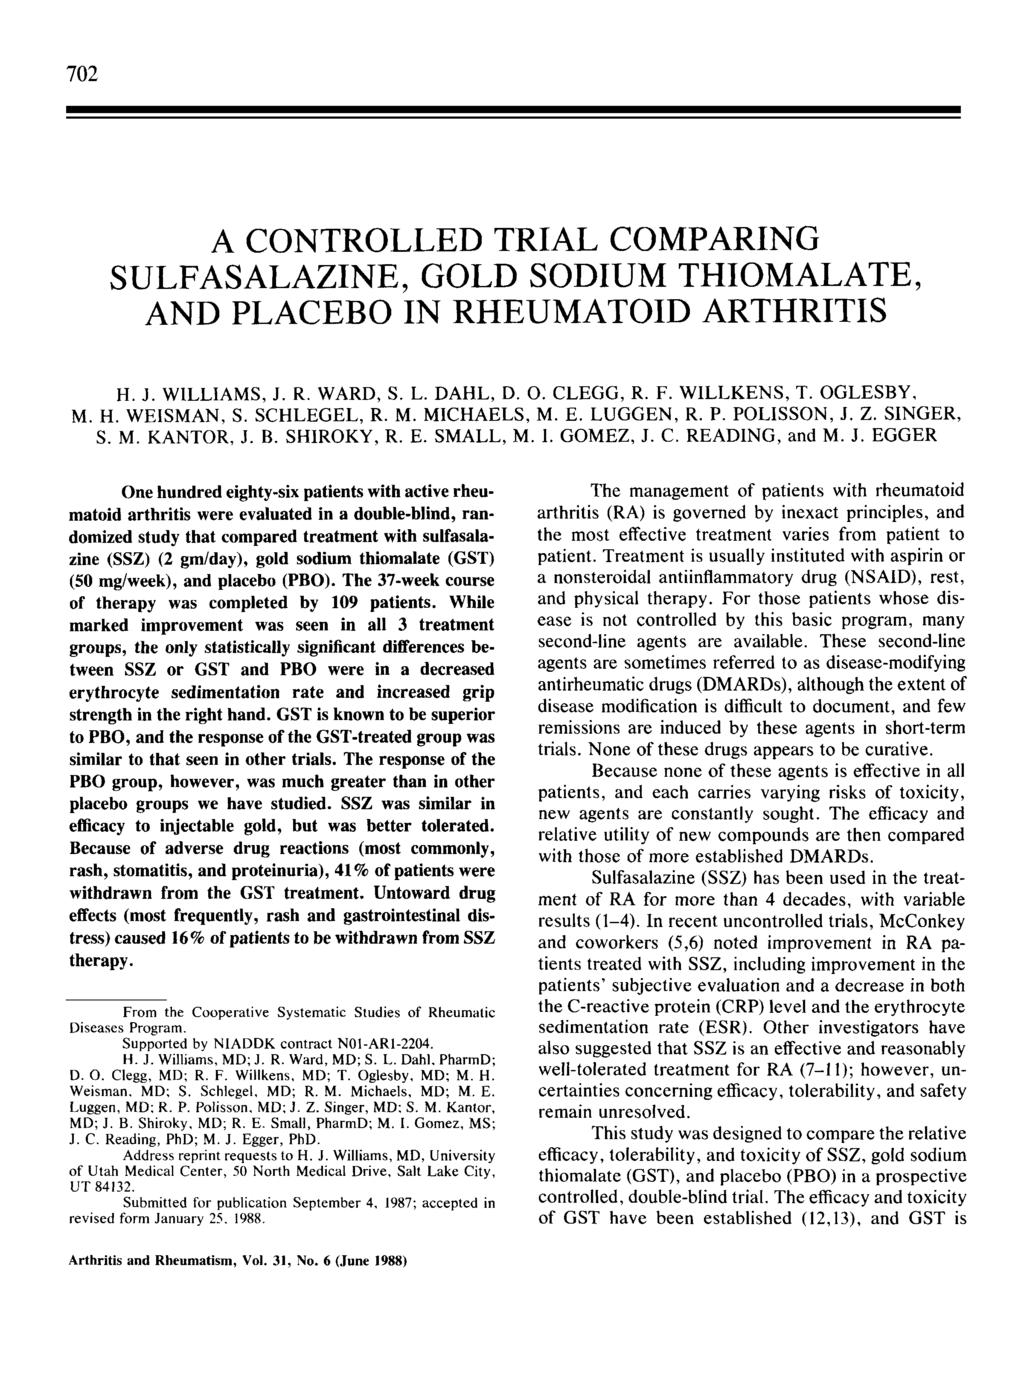 72 A CONTROLLED TRIAL COMPARING SULFASALAZINE, GOLD SODIUM THIOMALATE, AND PLACEBO IN RHEUMATOID ARTHRITIS H. J. WILLIAMS, J. R. WARD, S. L. DAHL, D.. CLEGG, R. F. WILLKENS, T. OGLESBY. M. H. WEISMAN, S.